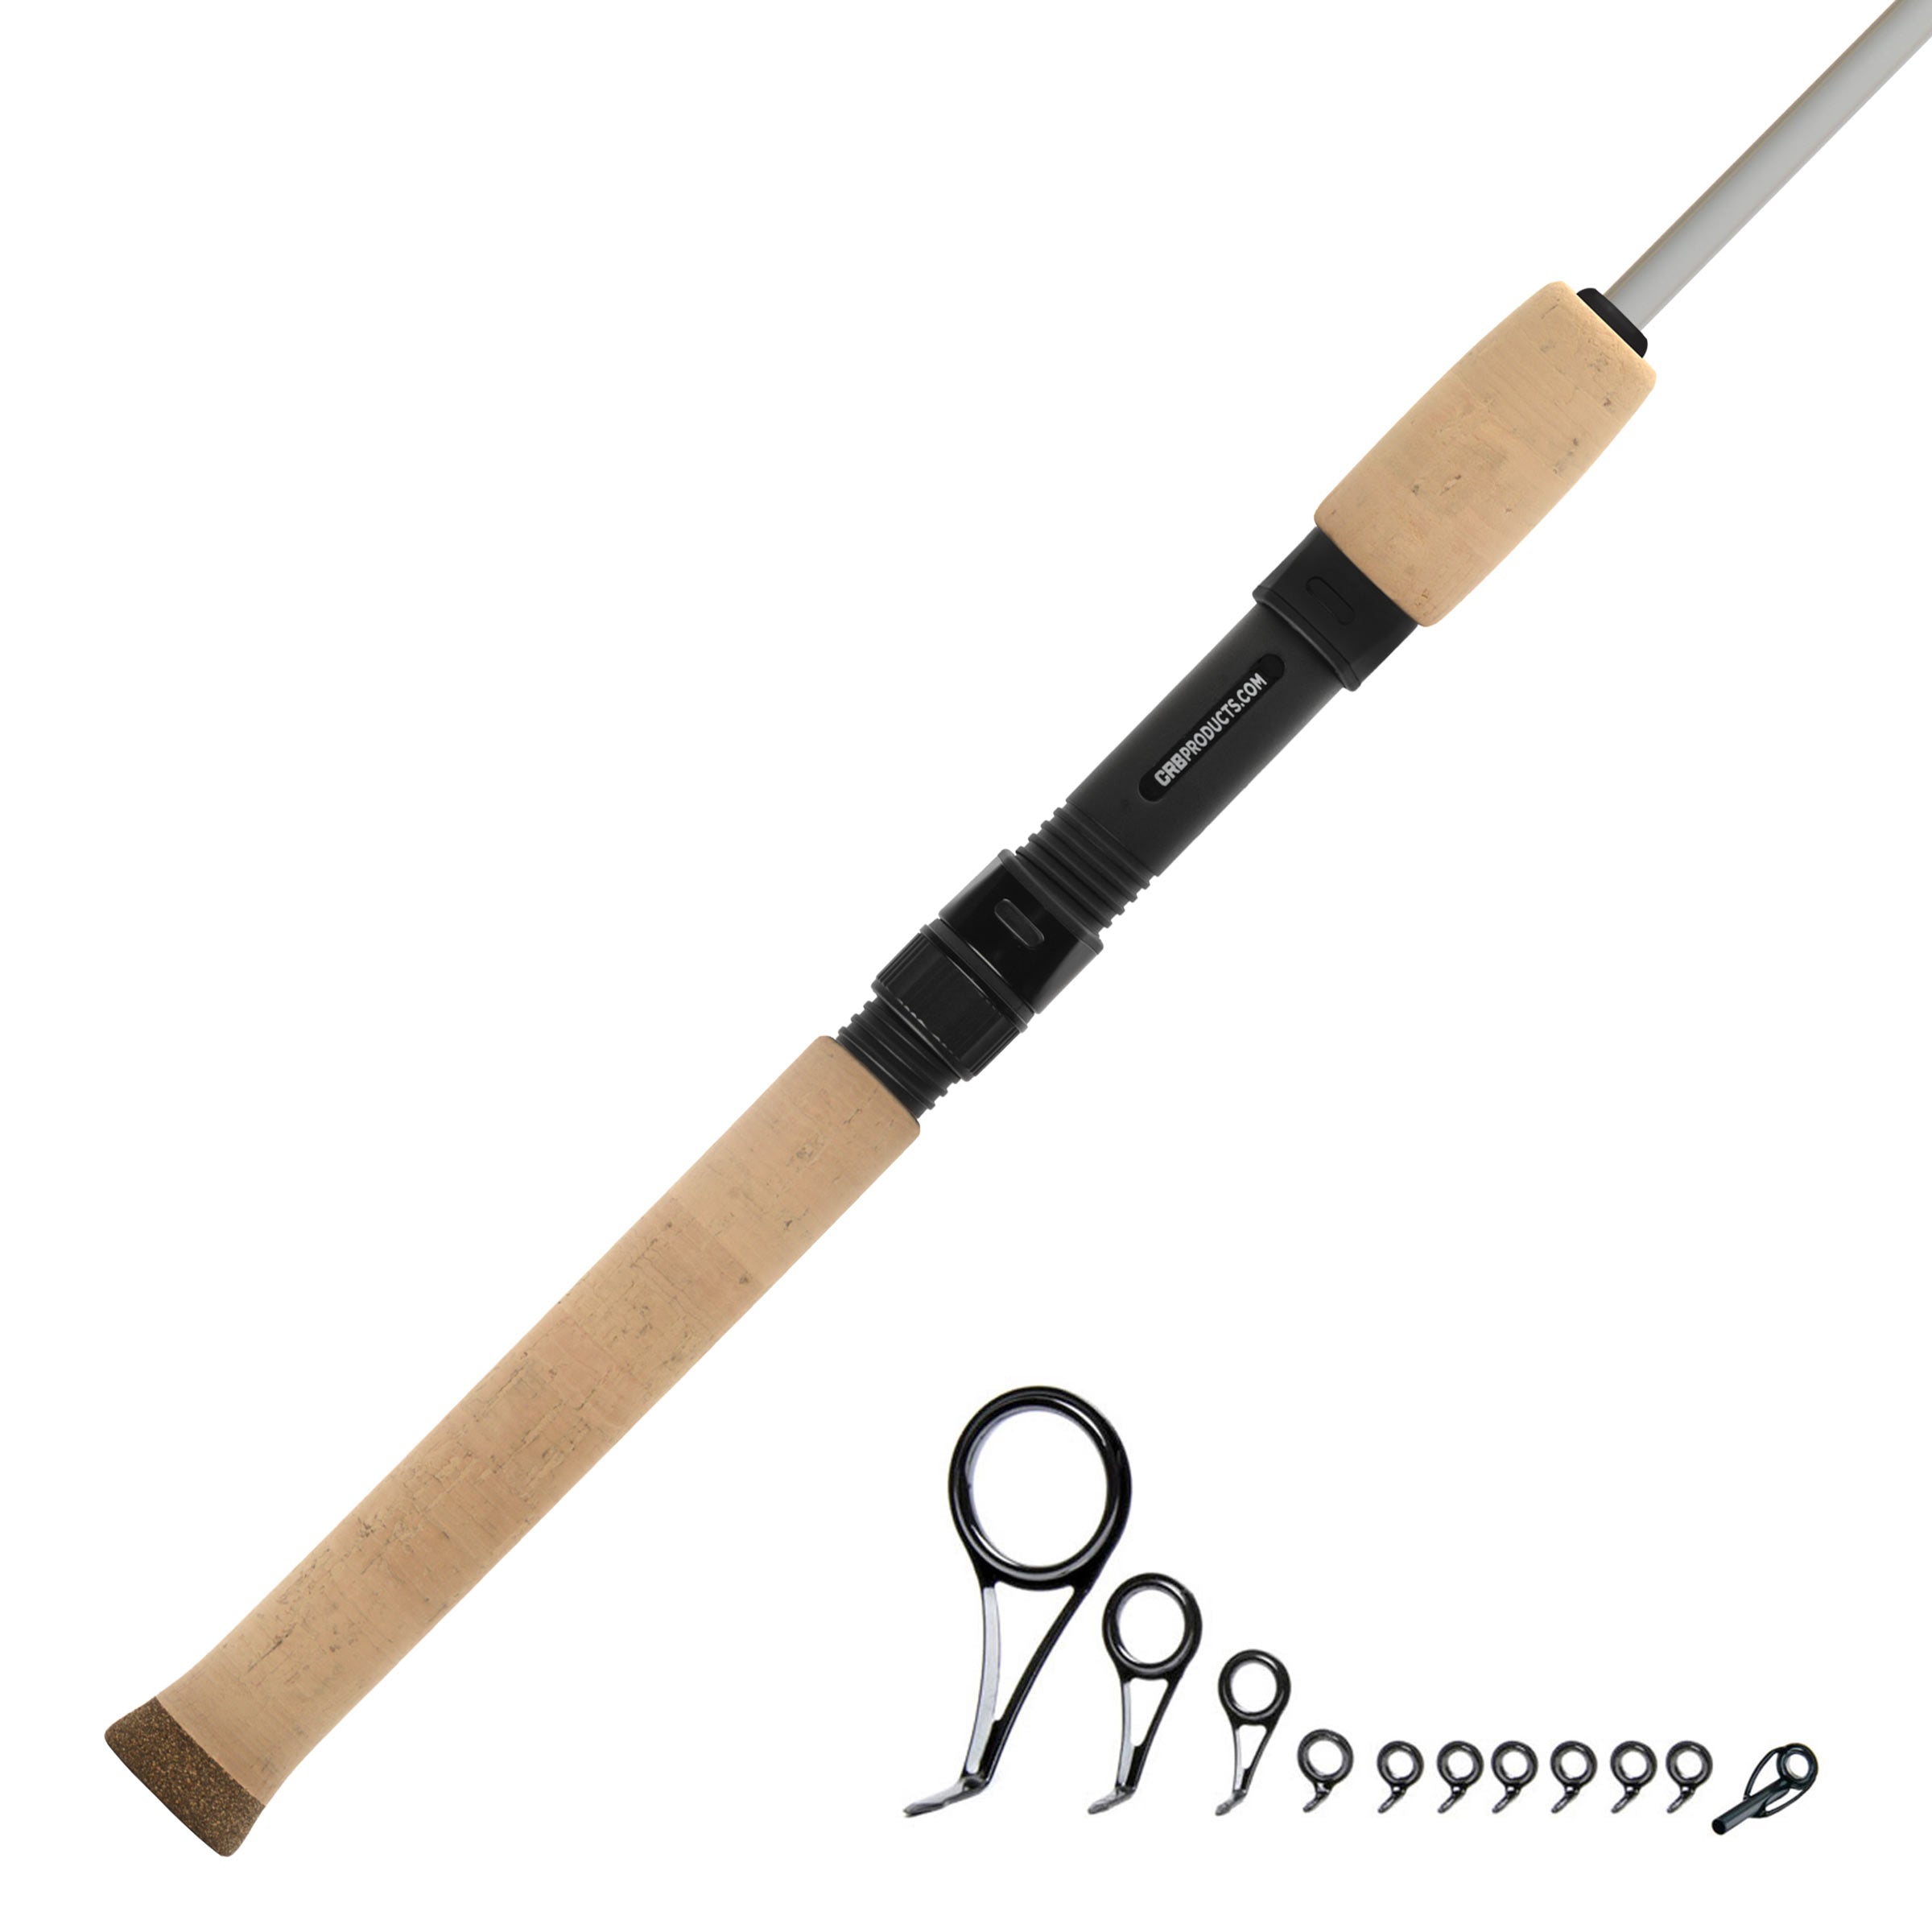 Rod Kits - Build Your Own Fishing Rod - Free Shipping